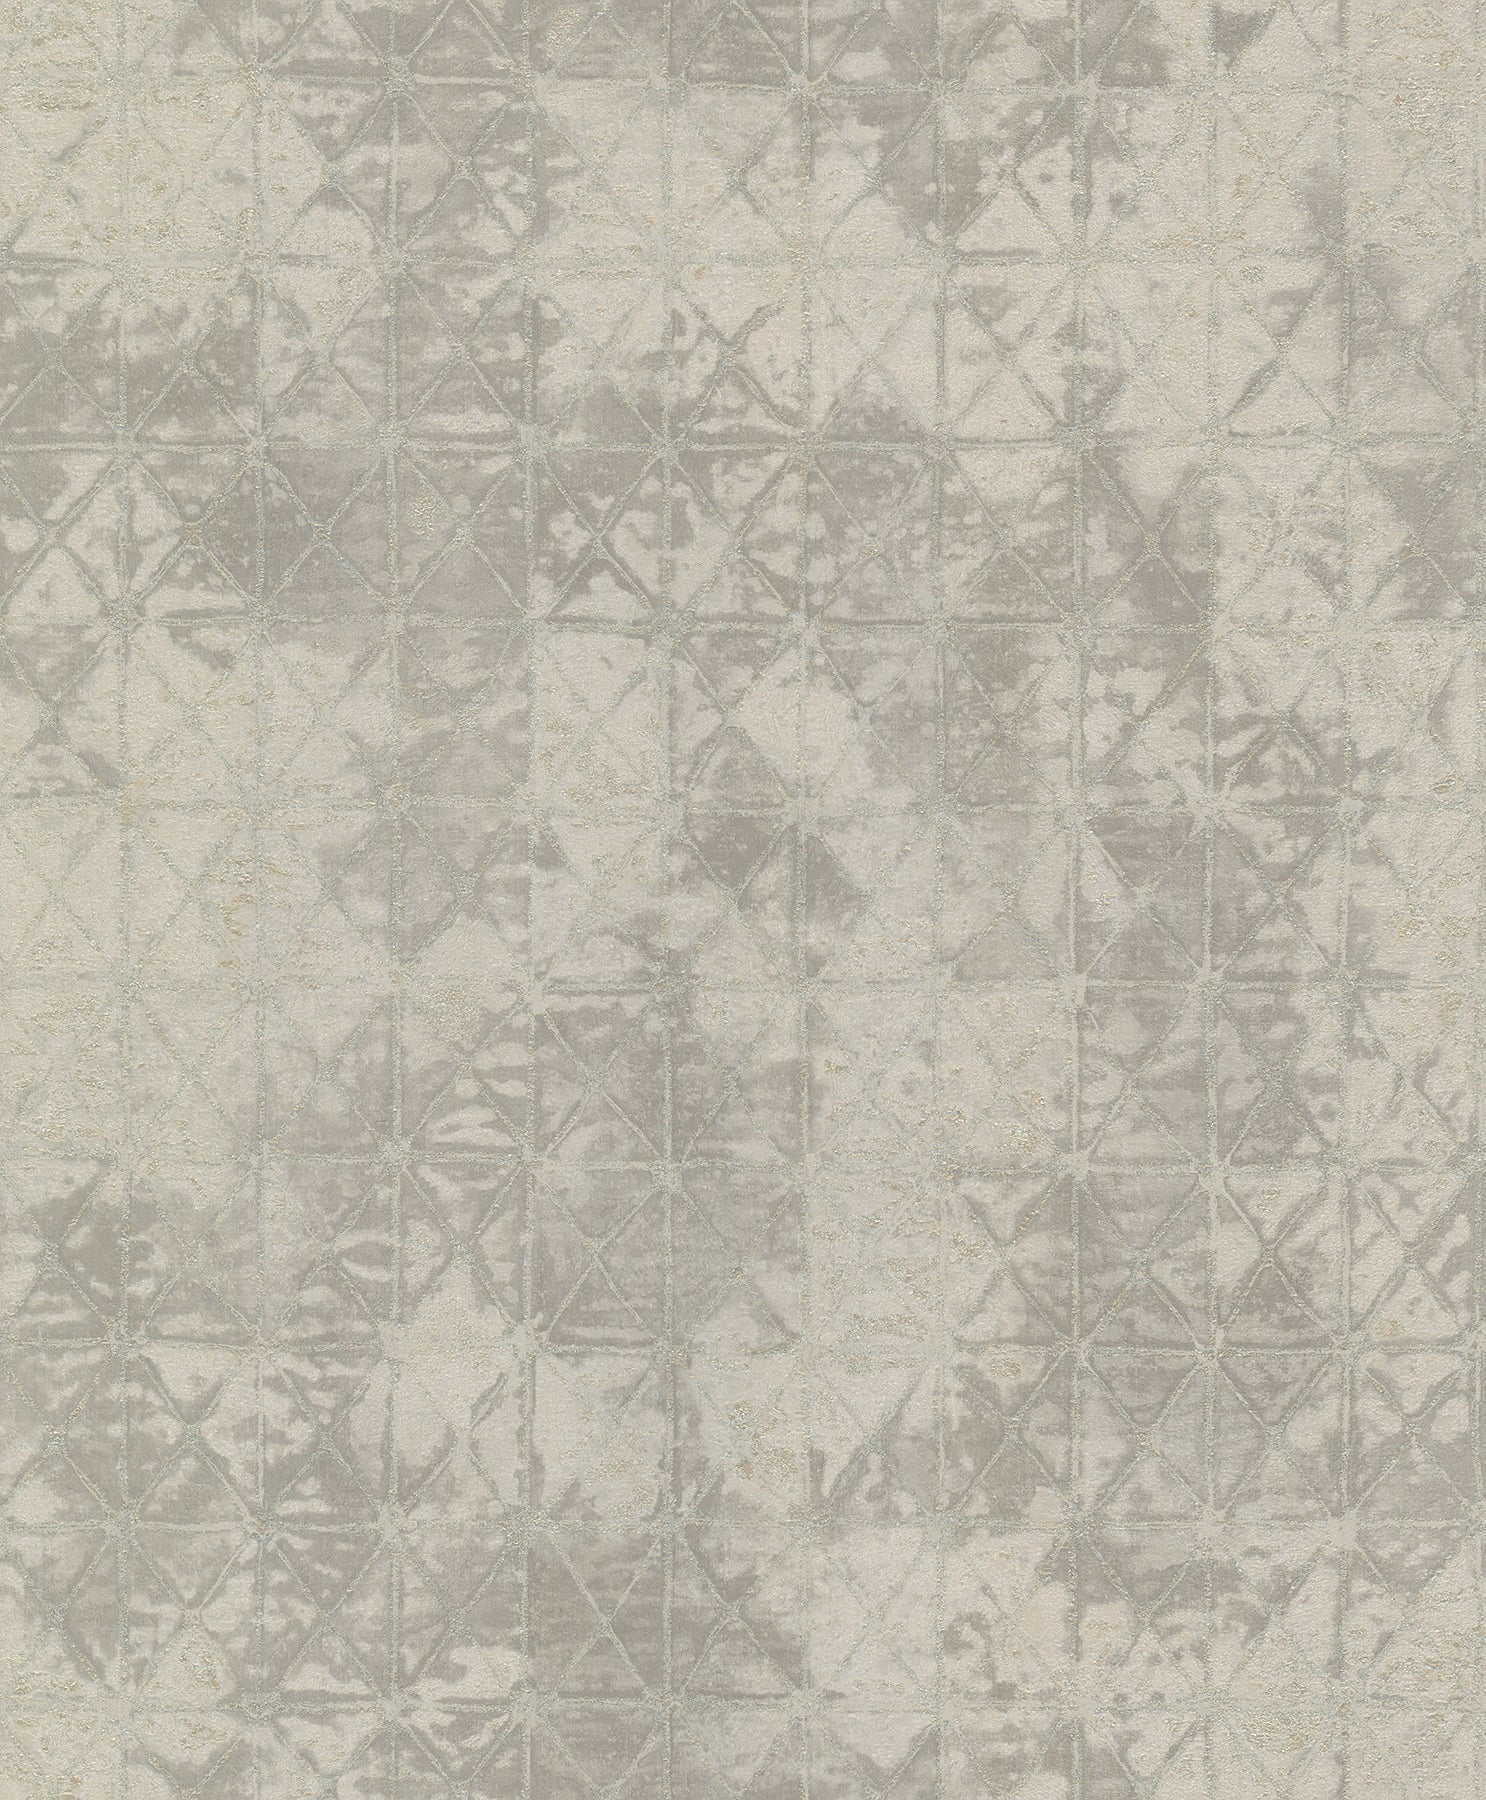 Buy 2971-86371 Dimensions Odell Silver Antique Tiles Silver A-Street Prints Wallpaper